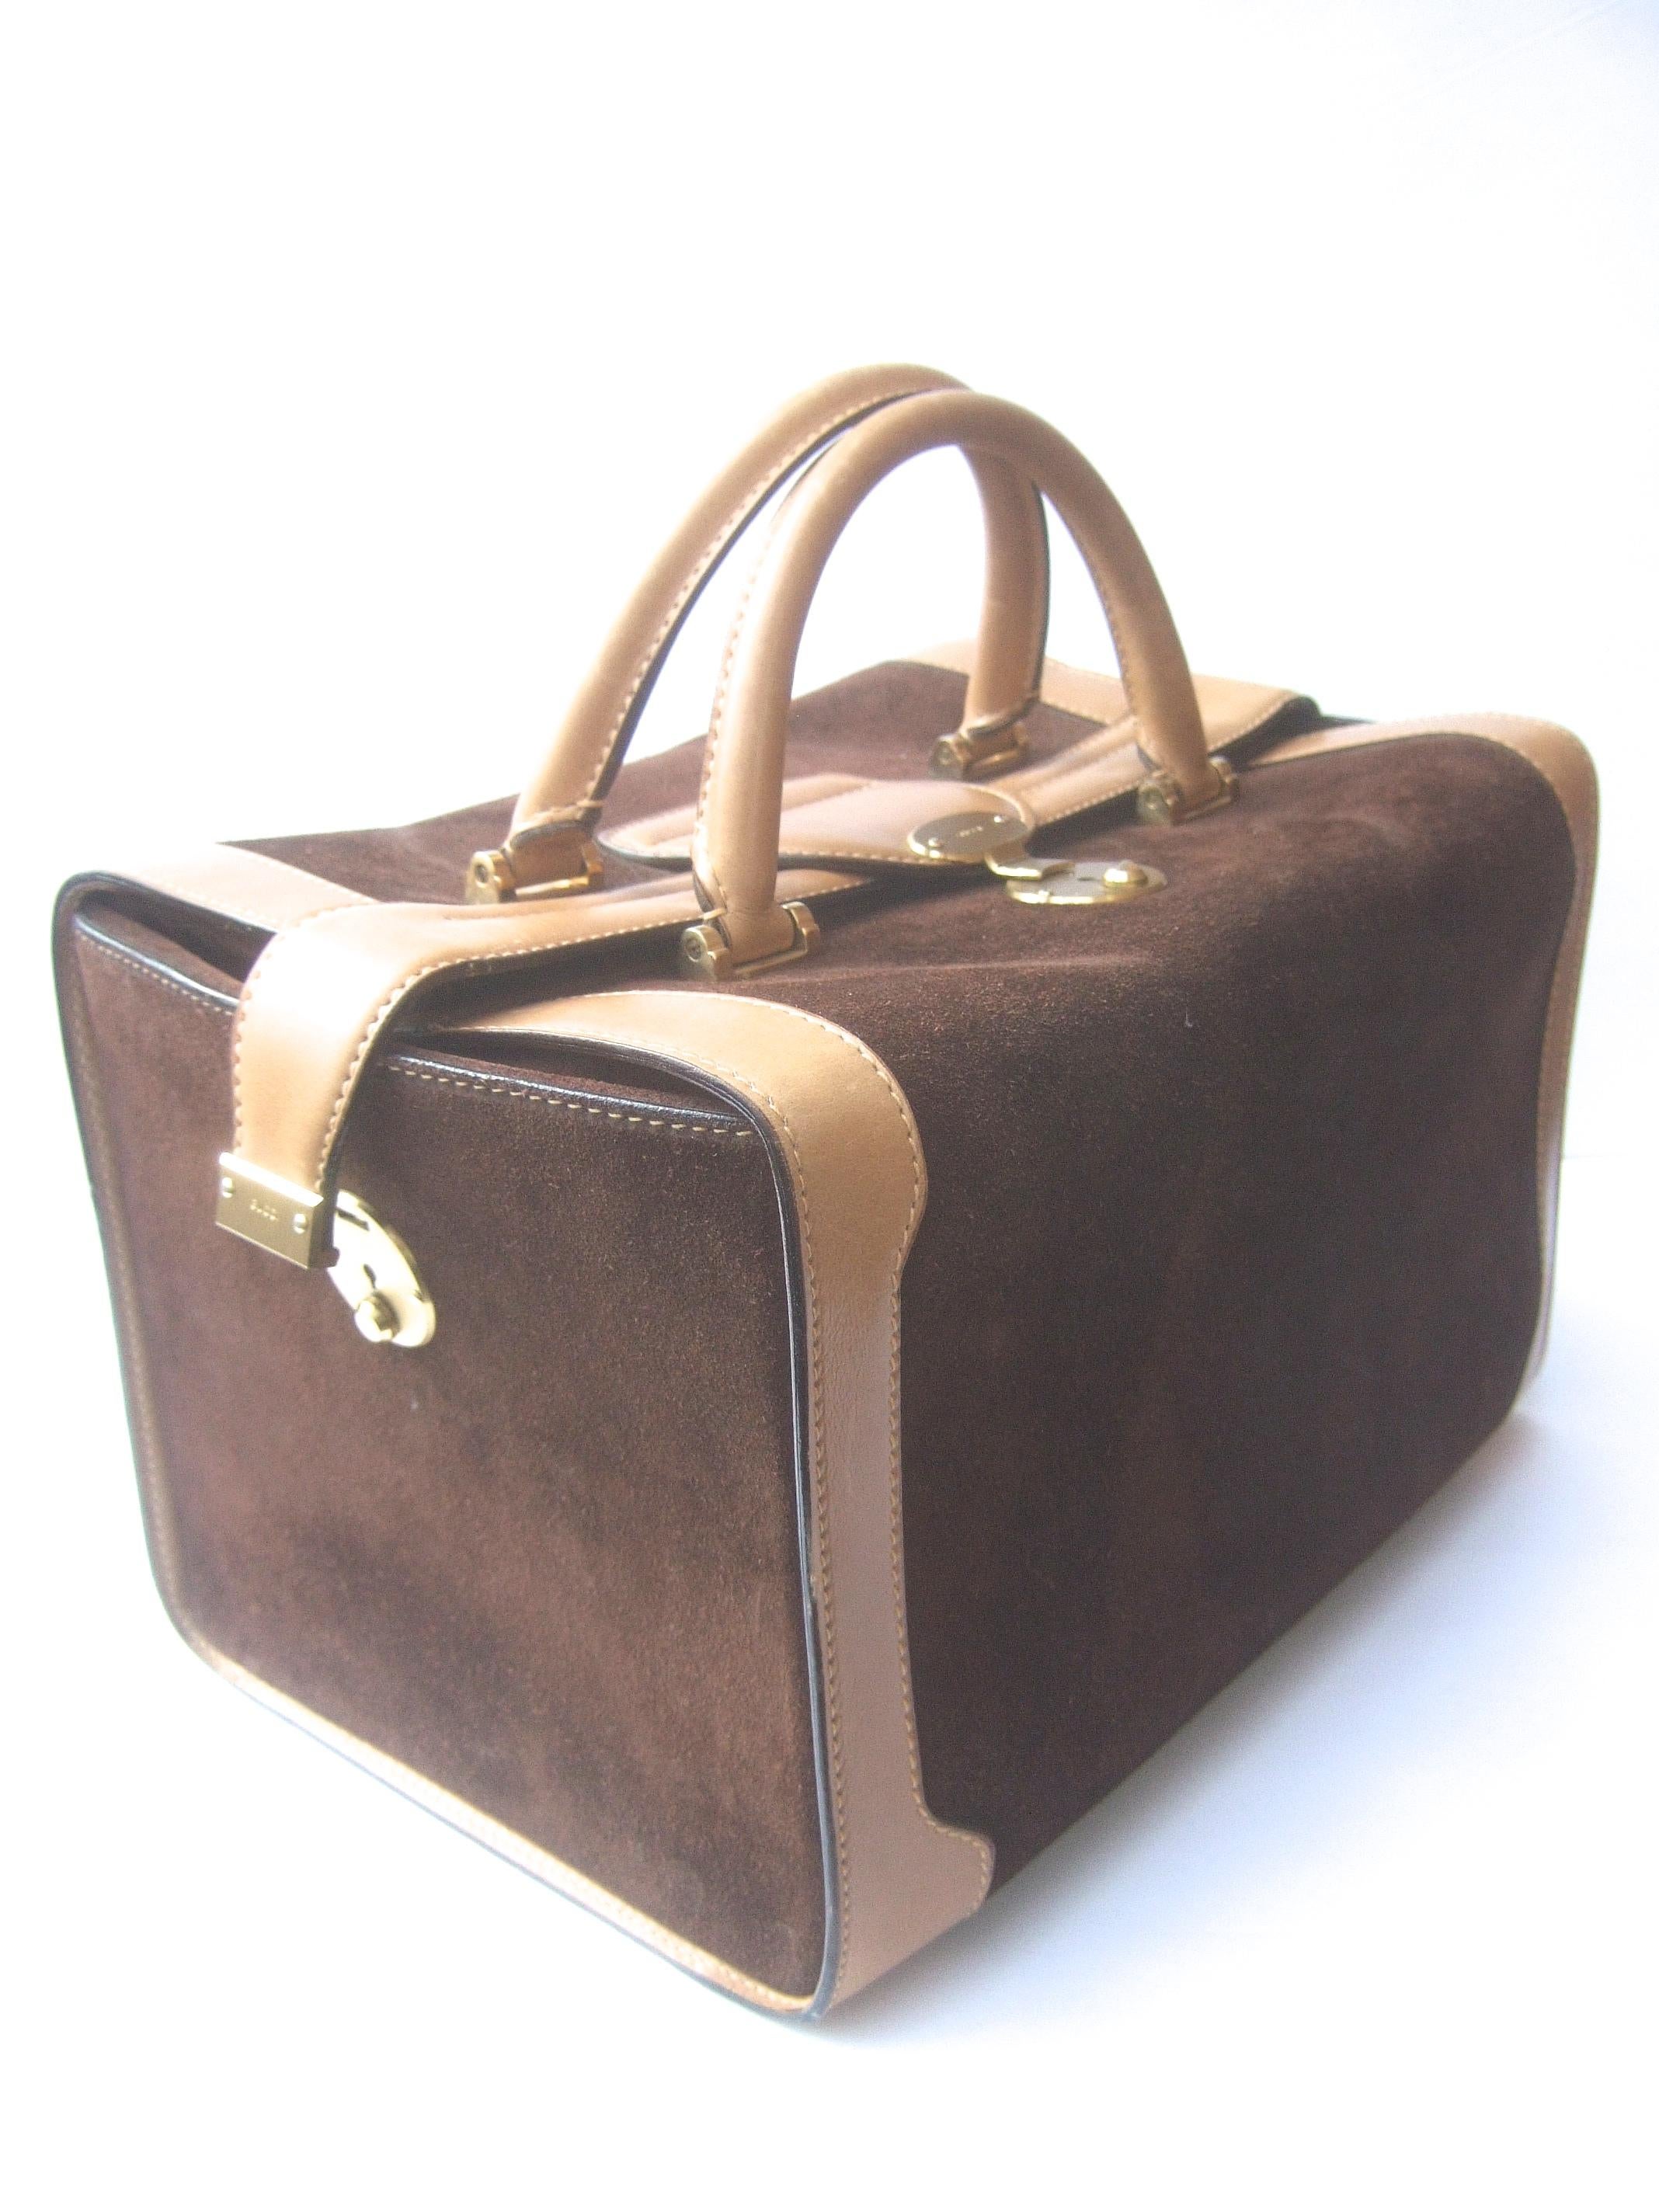 Gucci Italy Rare Chocolate Brown Suede Leather Trim Train Case c 1970s 4